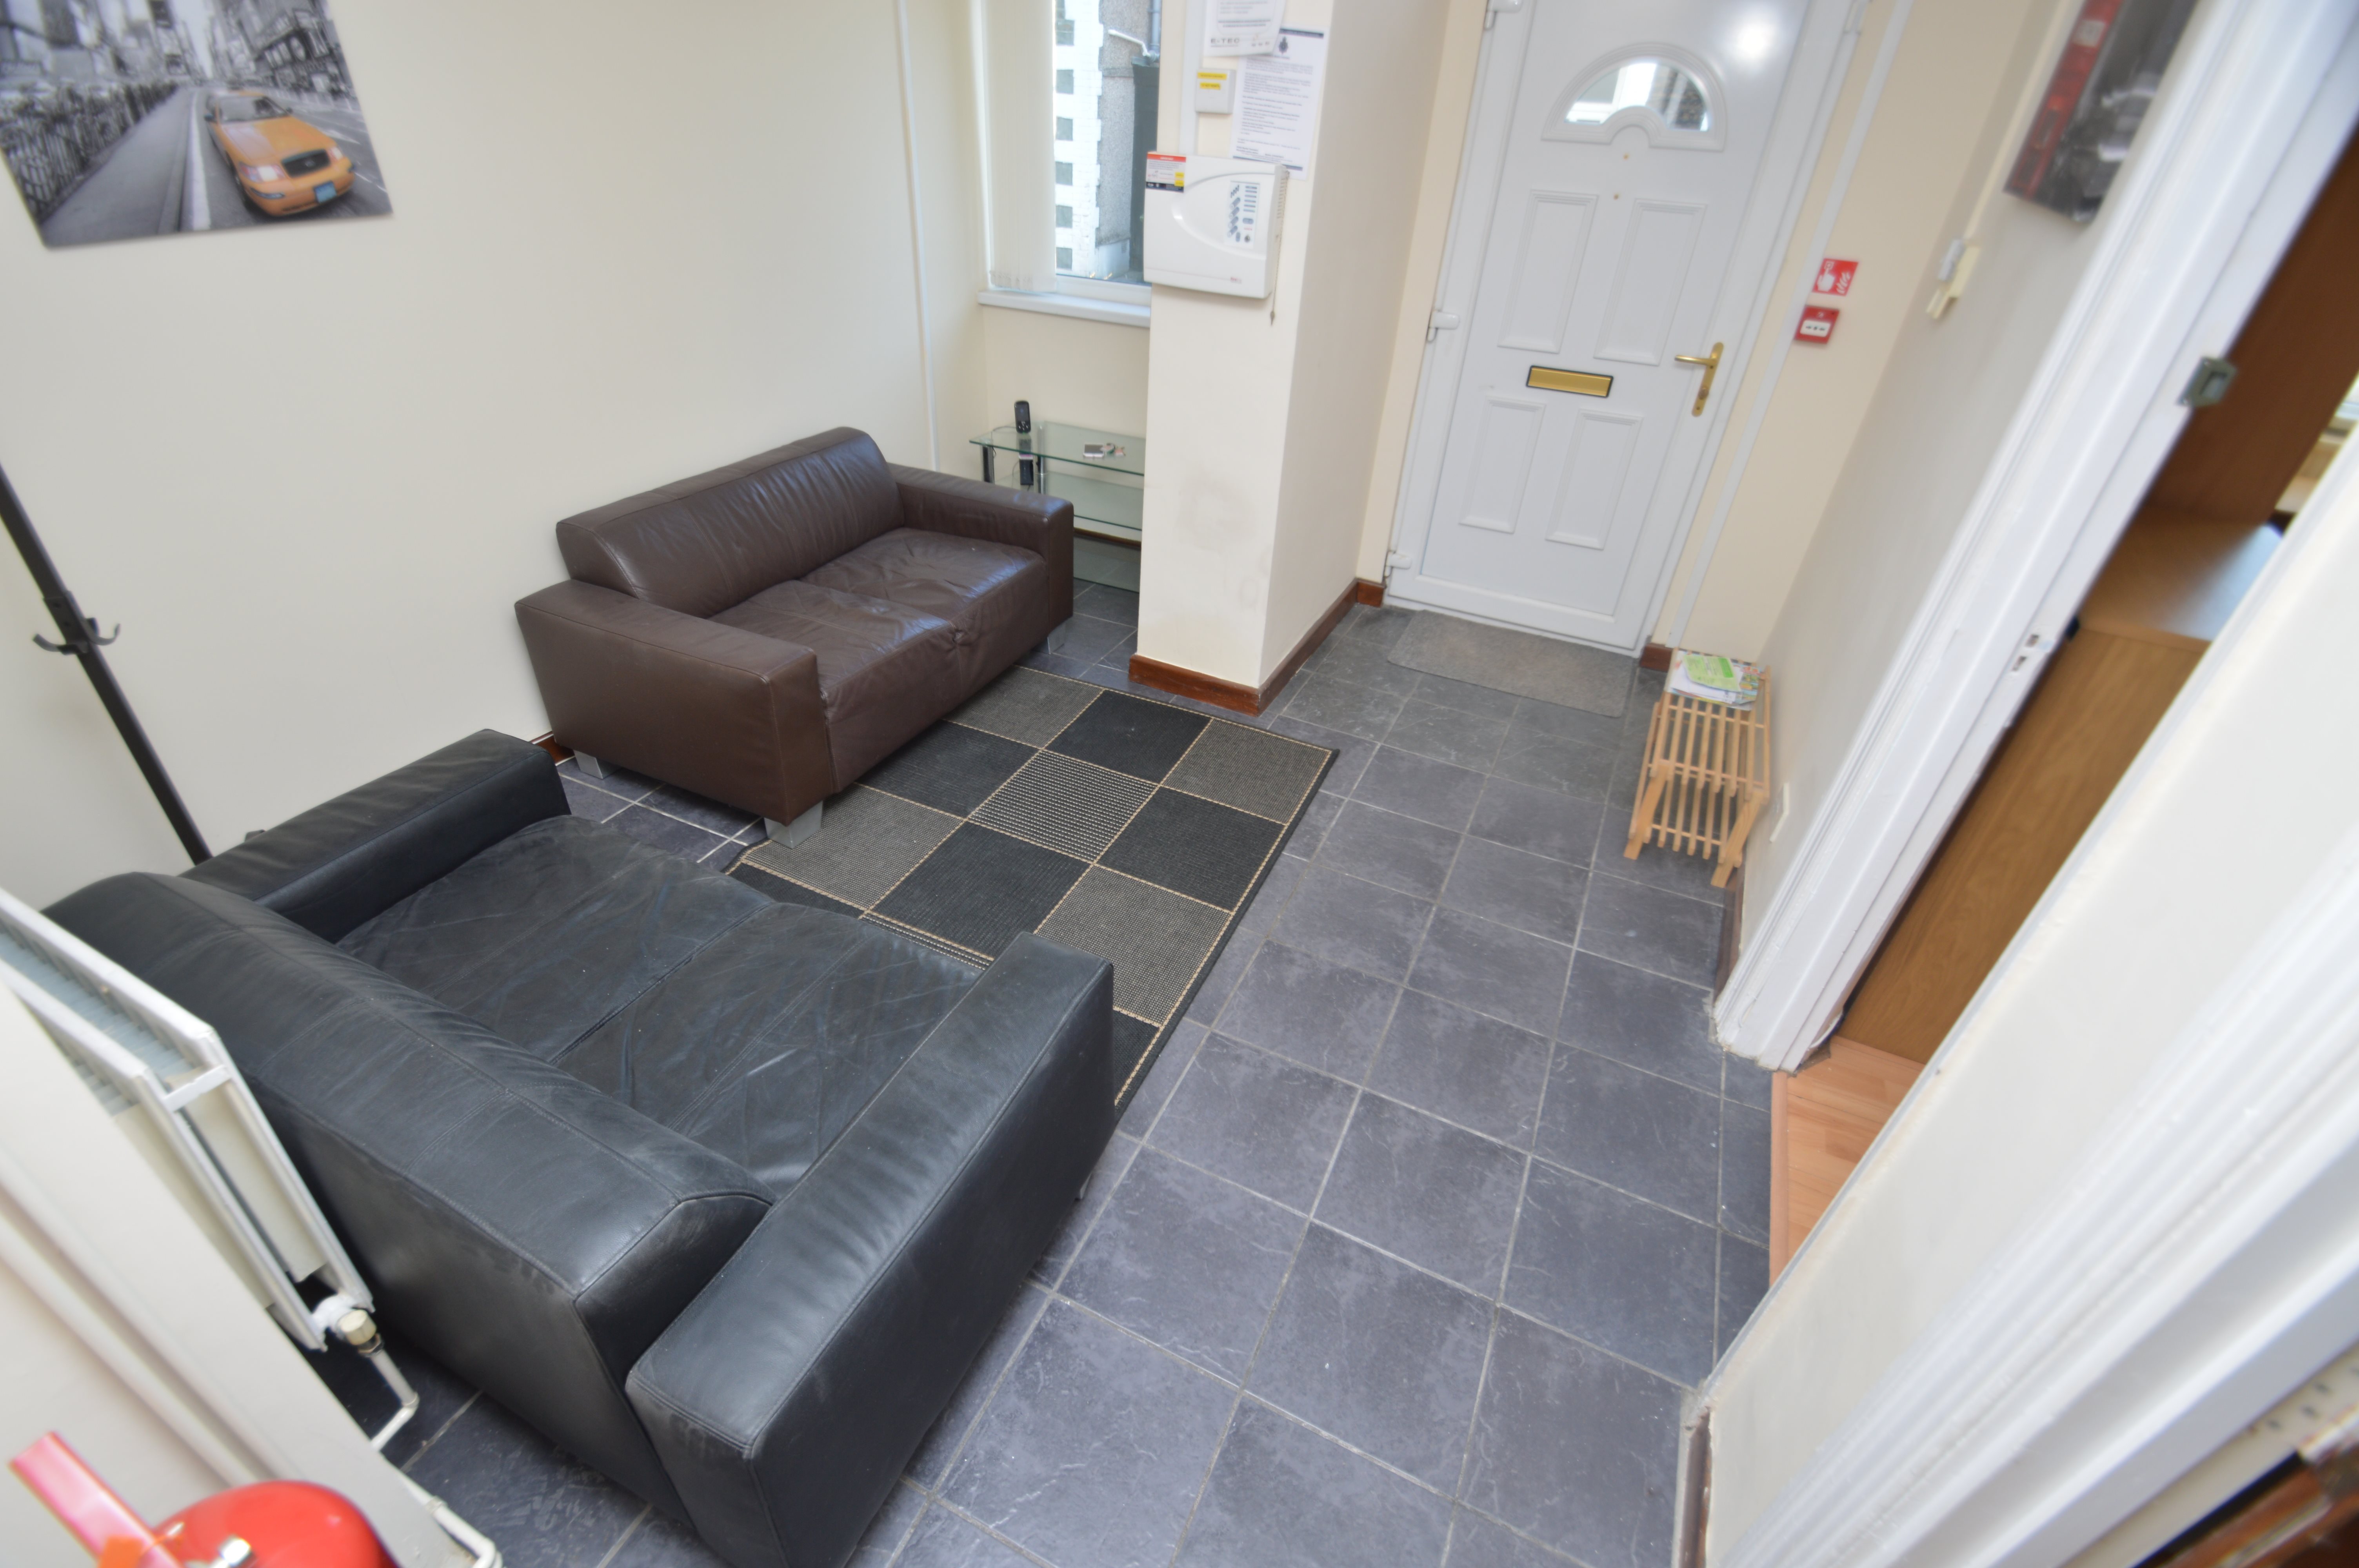 1 bed house / flat share to rent in Wood Road , Treforest  6